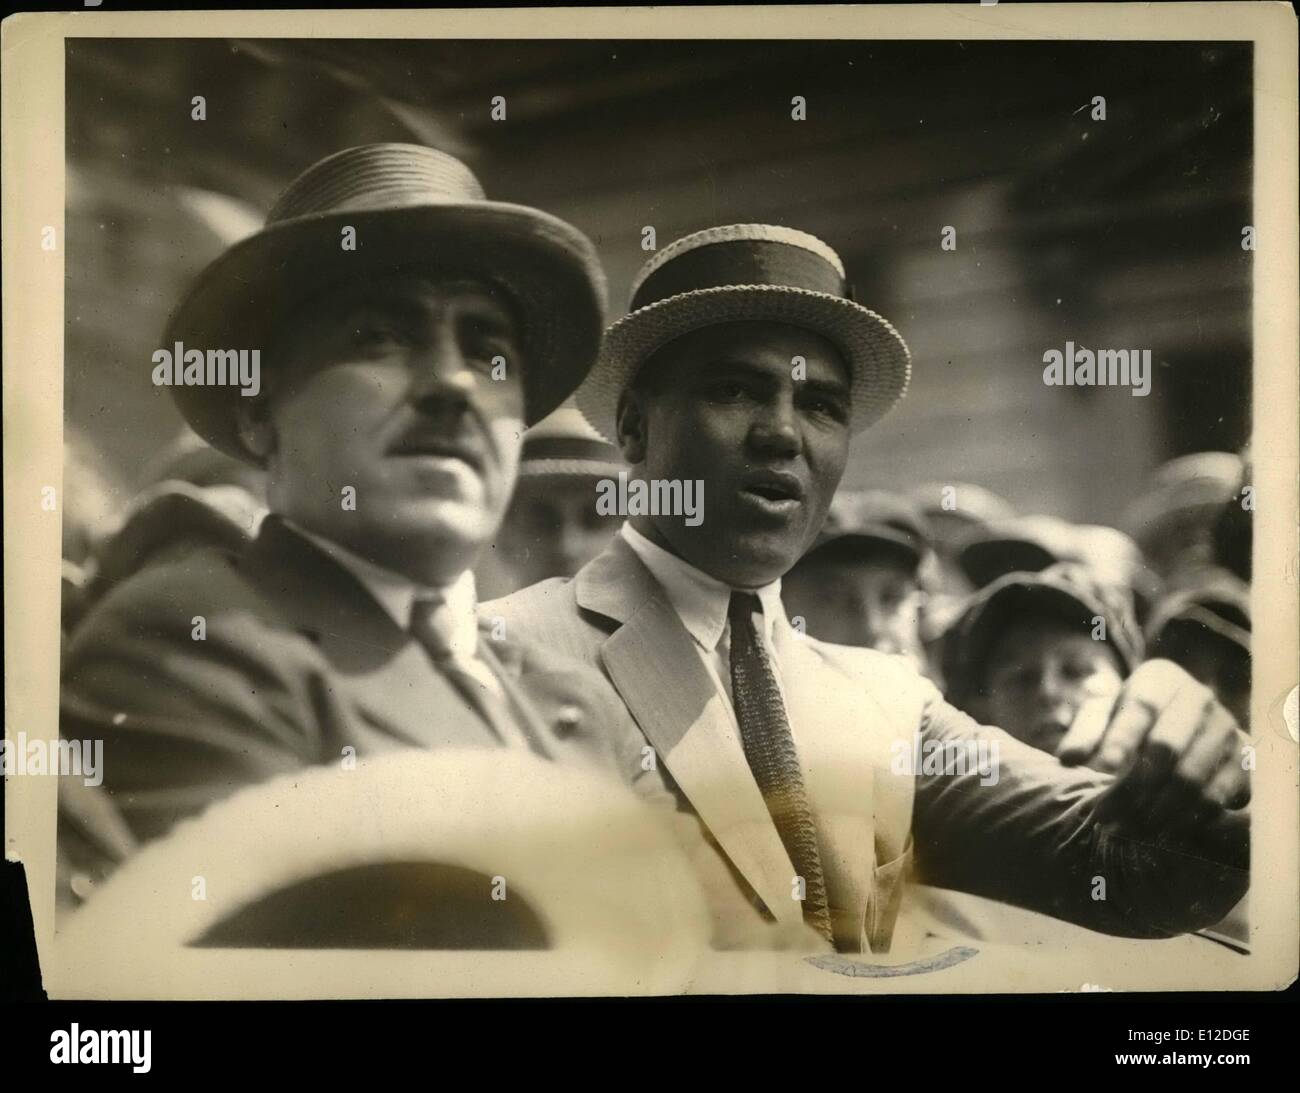 Dec. 15, 2011 - King of heavyweights visits Boston. Photo shows Jack Dempsey, heavyweight champion of the world, with acting Mayor David J. Brickley of Boston in Jack's car in front of City Hall, Boston, Mass., where the heavyweight title holder is visiting friends. Stock Photo